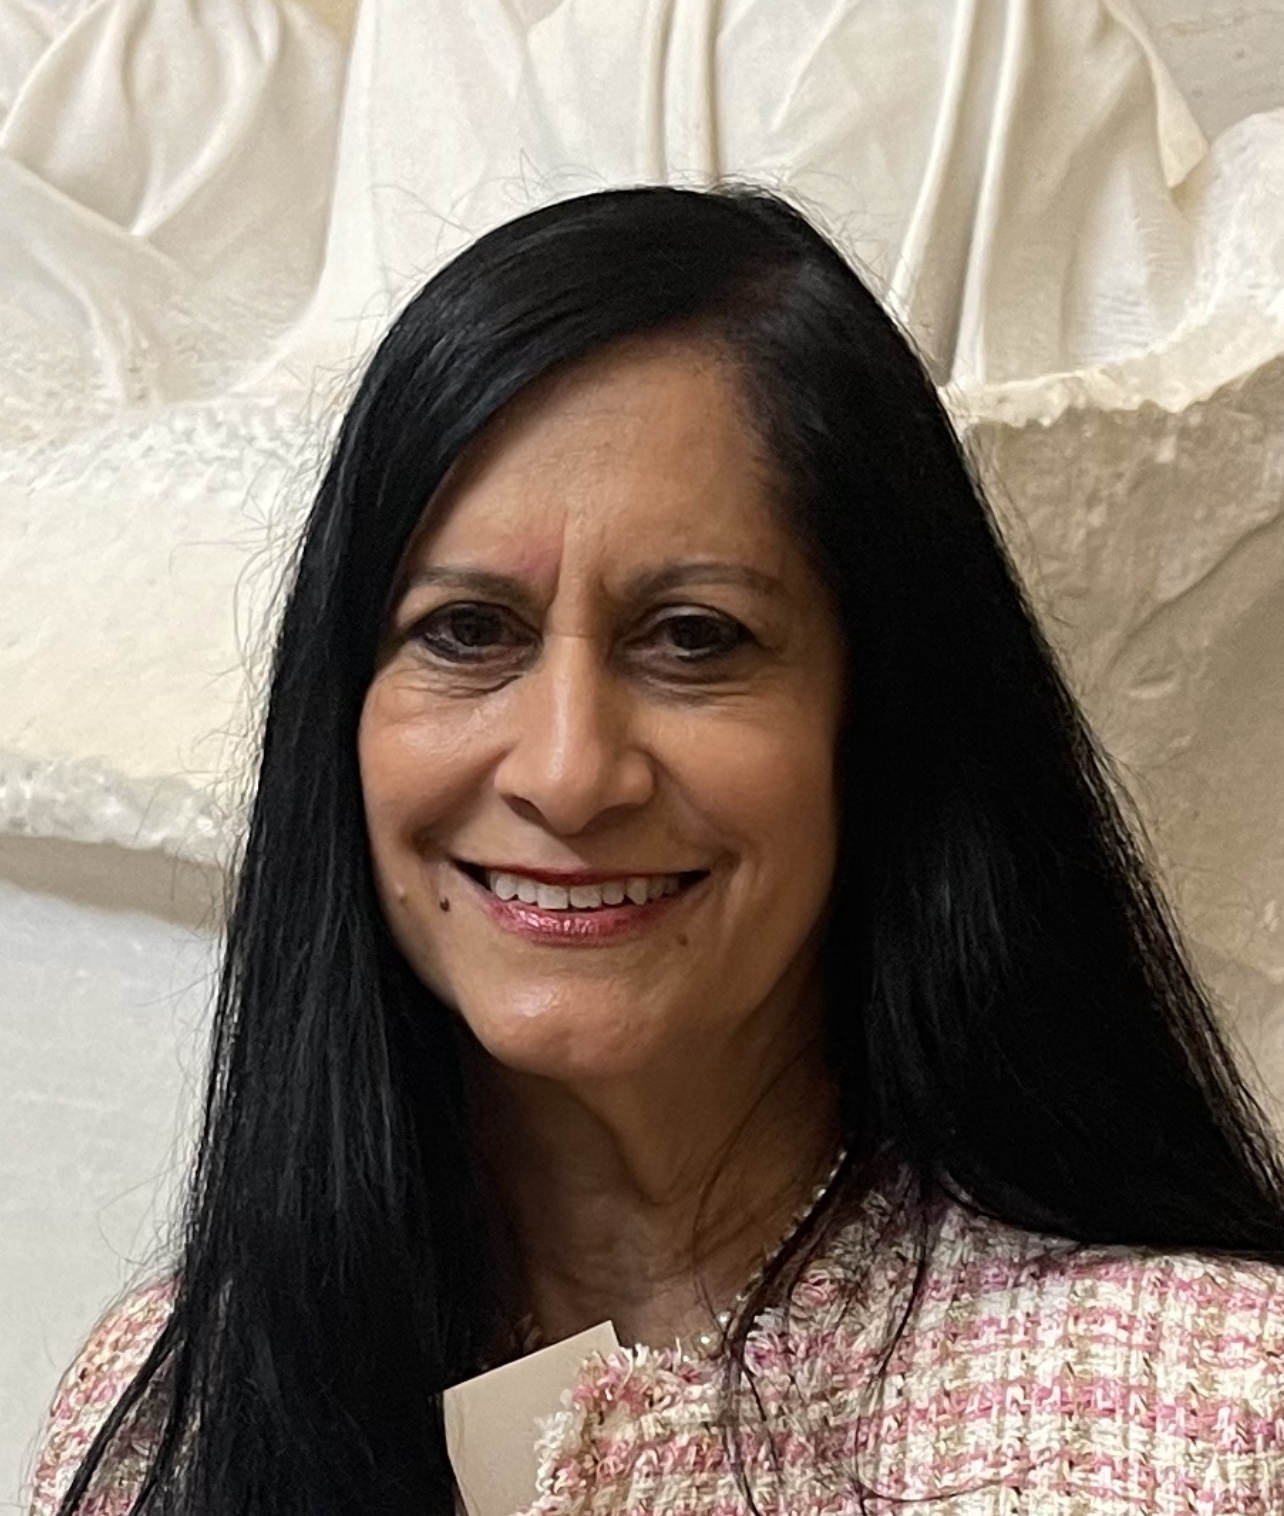 A photo of a smiling woman with long straight black hair